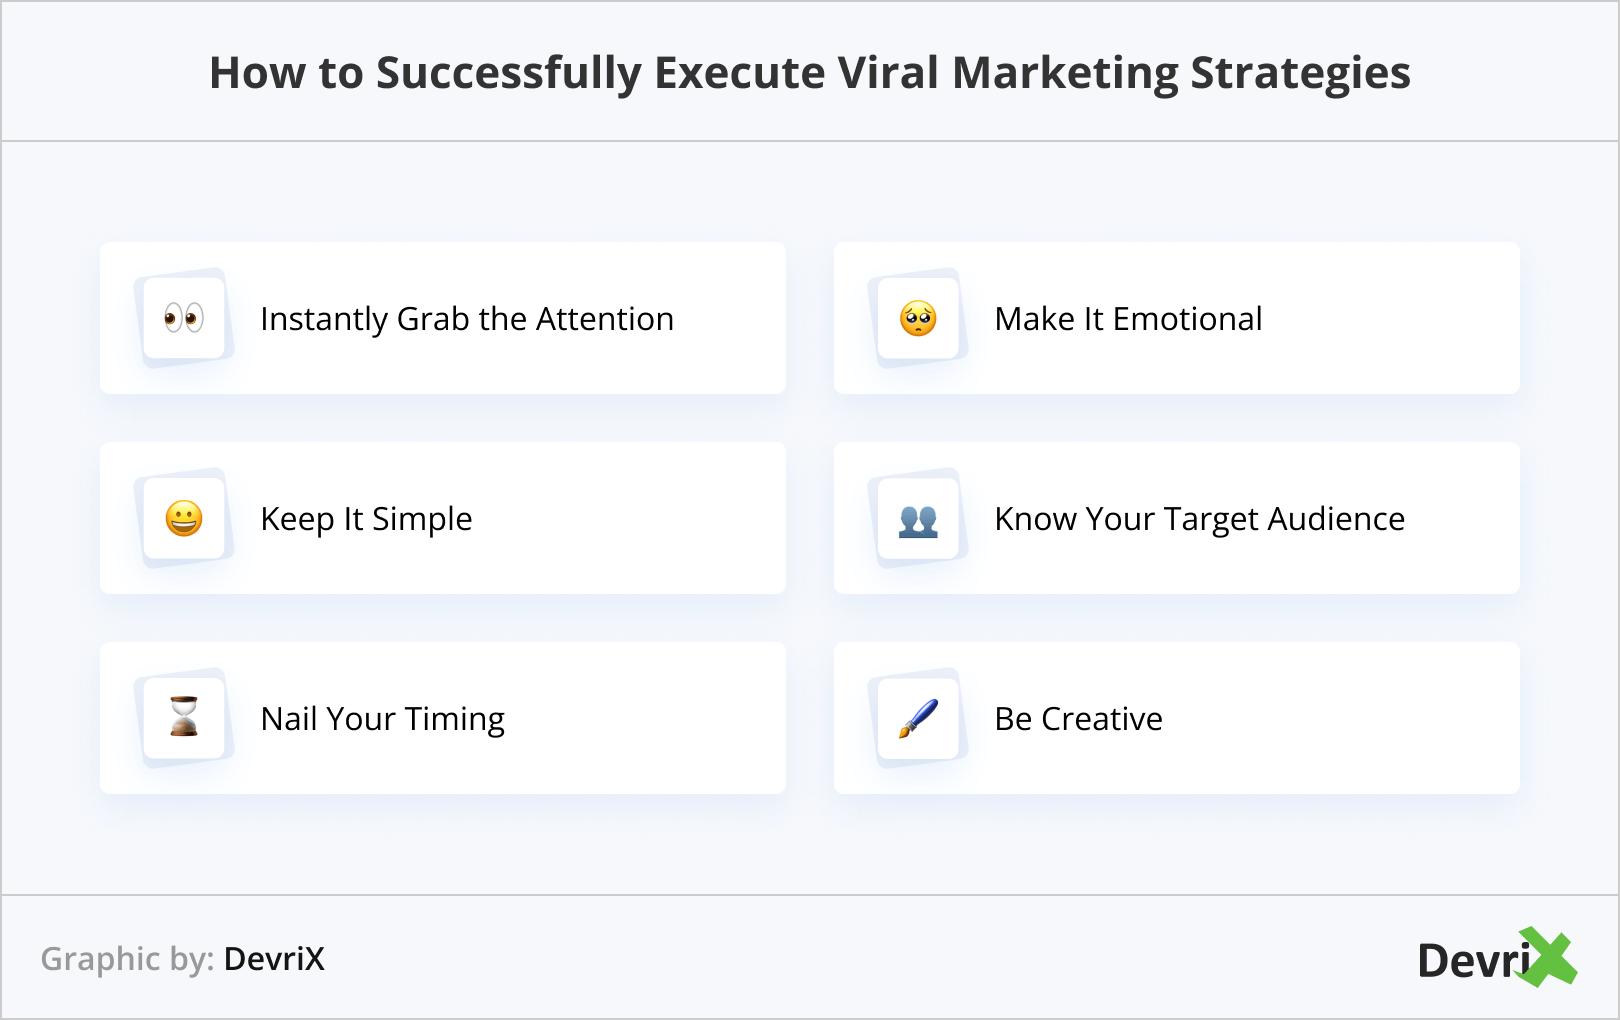 How to Successfully Execute Viral Marketing Strategies